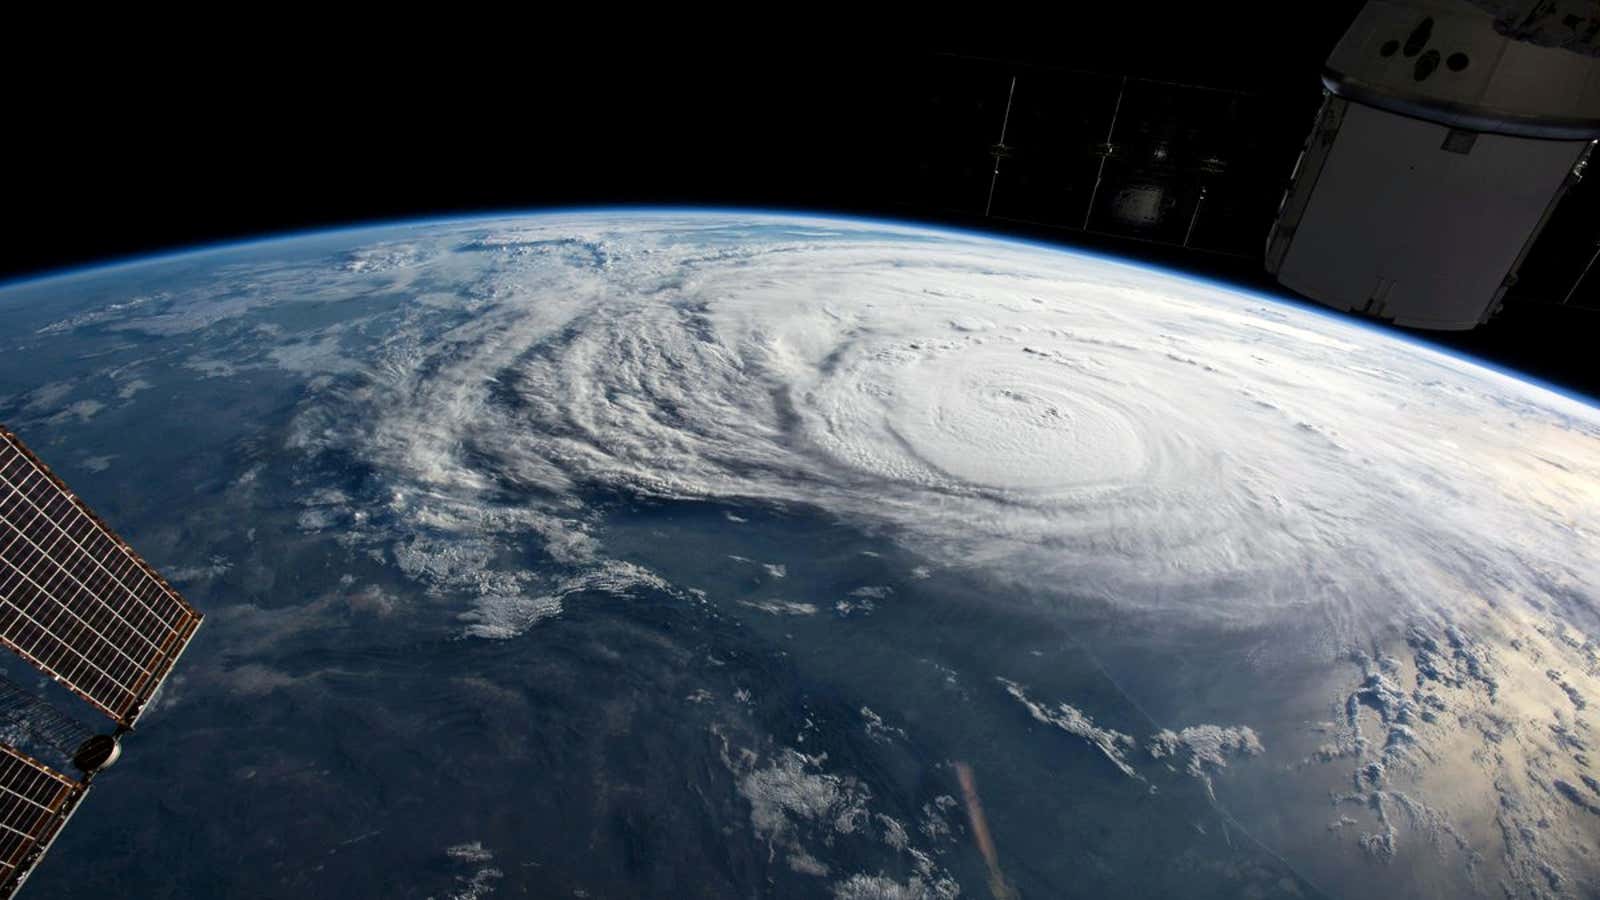 Hurricane Harvey is pictured off the coast of Texas, U.S. from aboard the International Space Station.